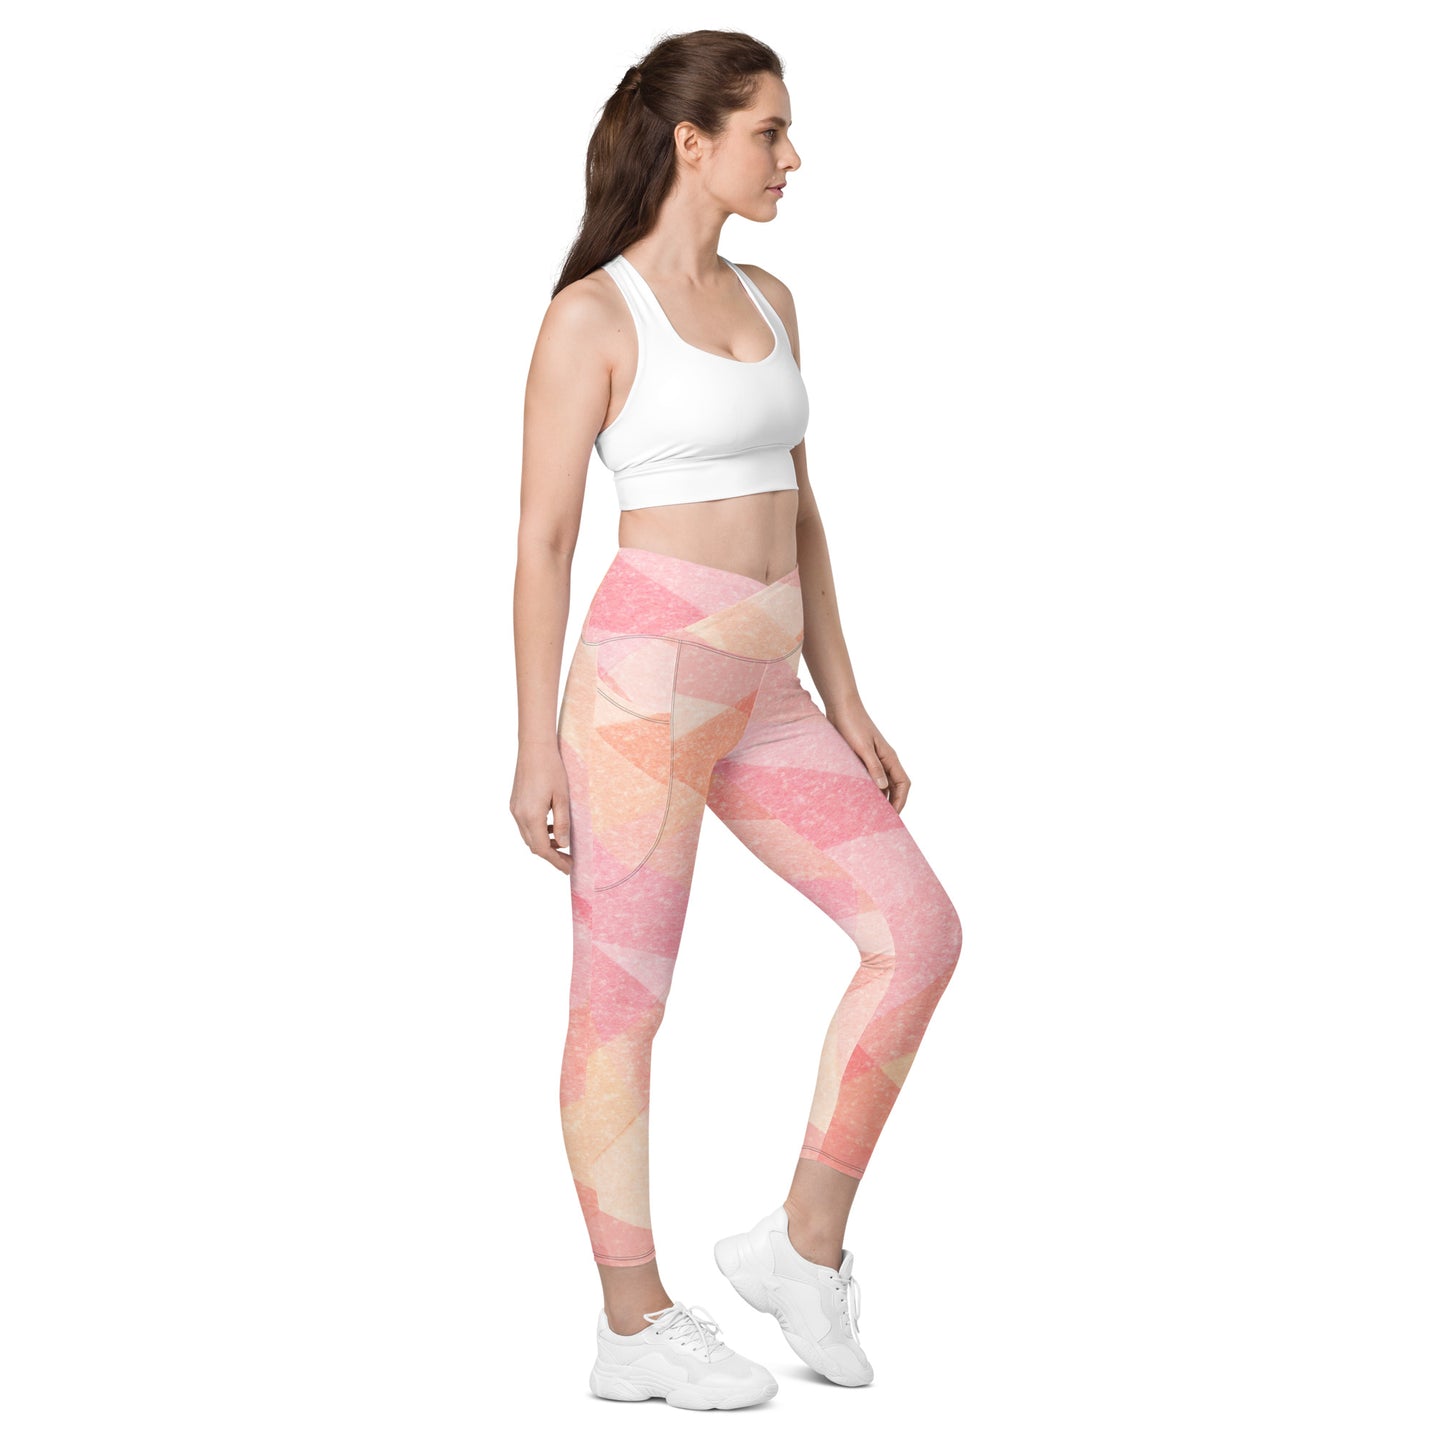  Jain ActiveFuse by Women's High-Waisted Support Leggings sold by Jain Yoga